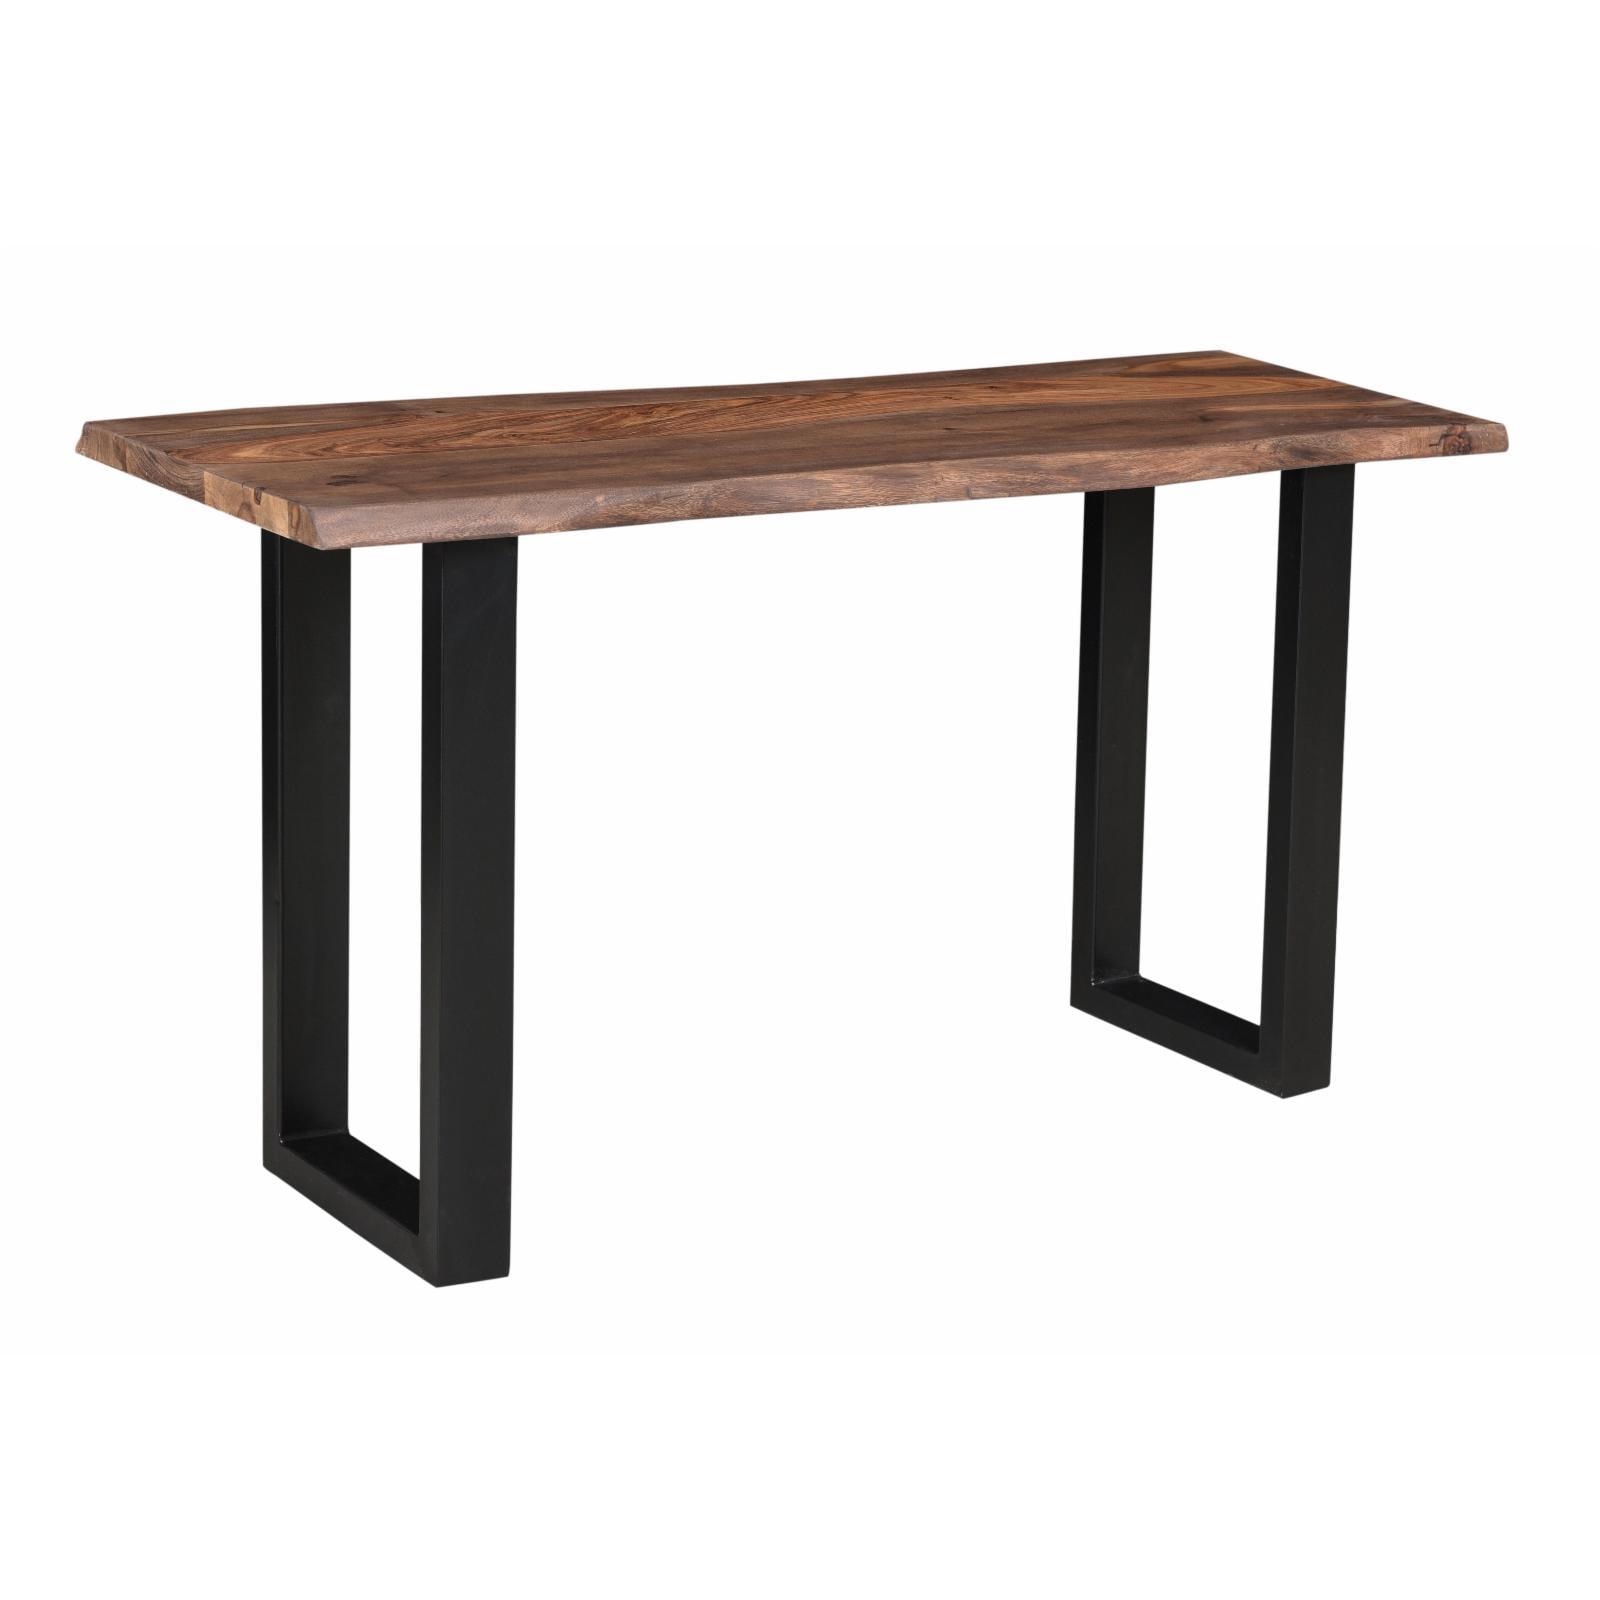 Sheesham Wood & Metal 58" Transitional Console Table in Nut Brown